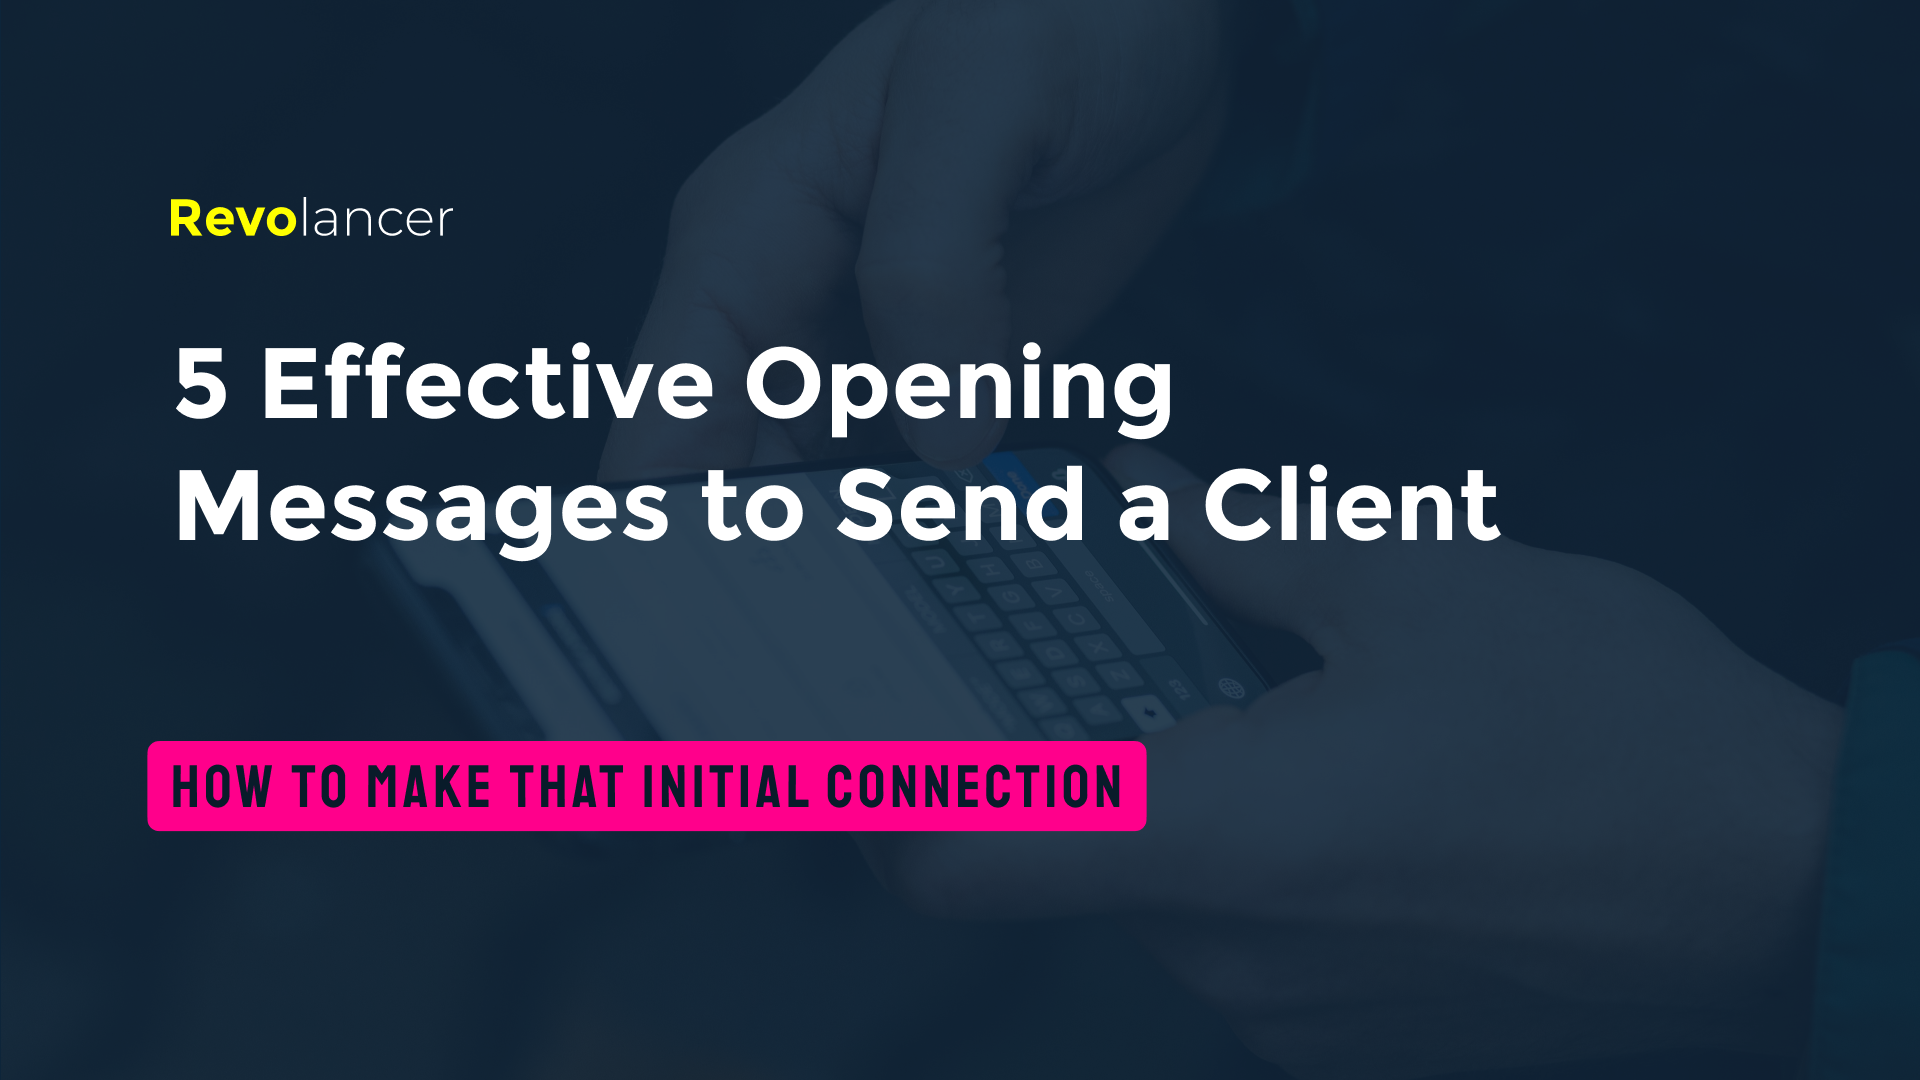 5 Effective Opening Messages to Send a Client